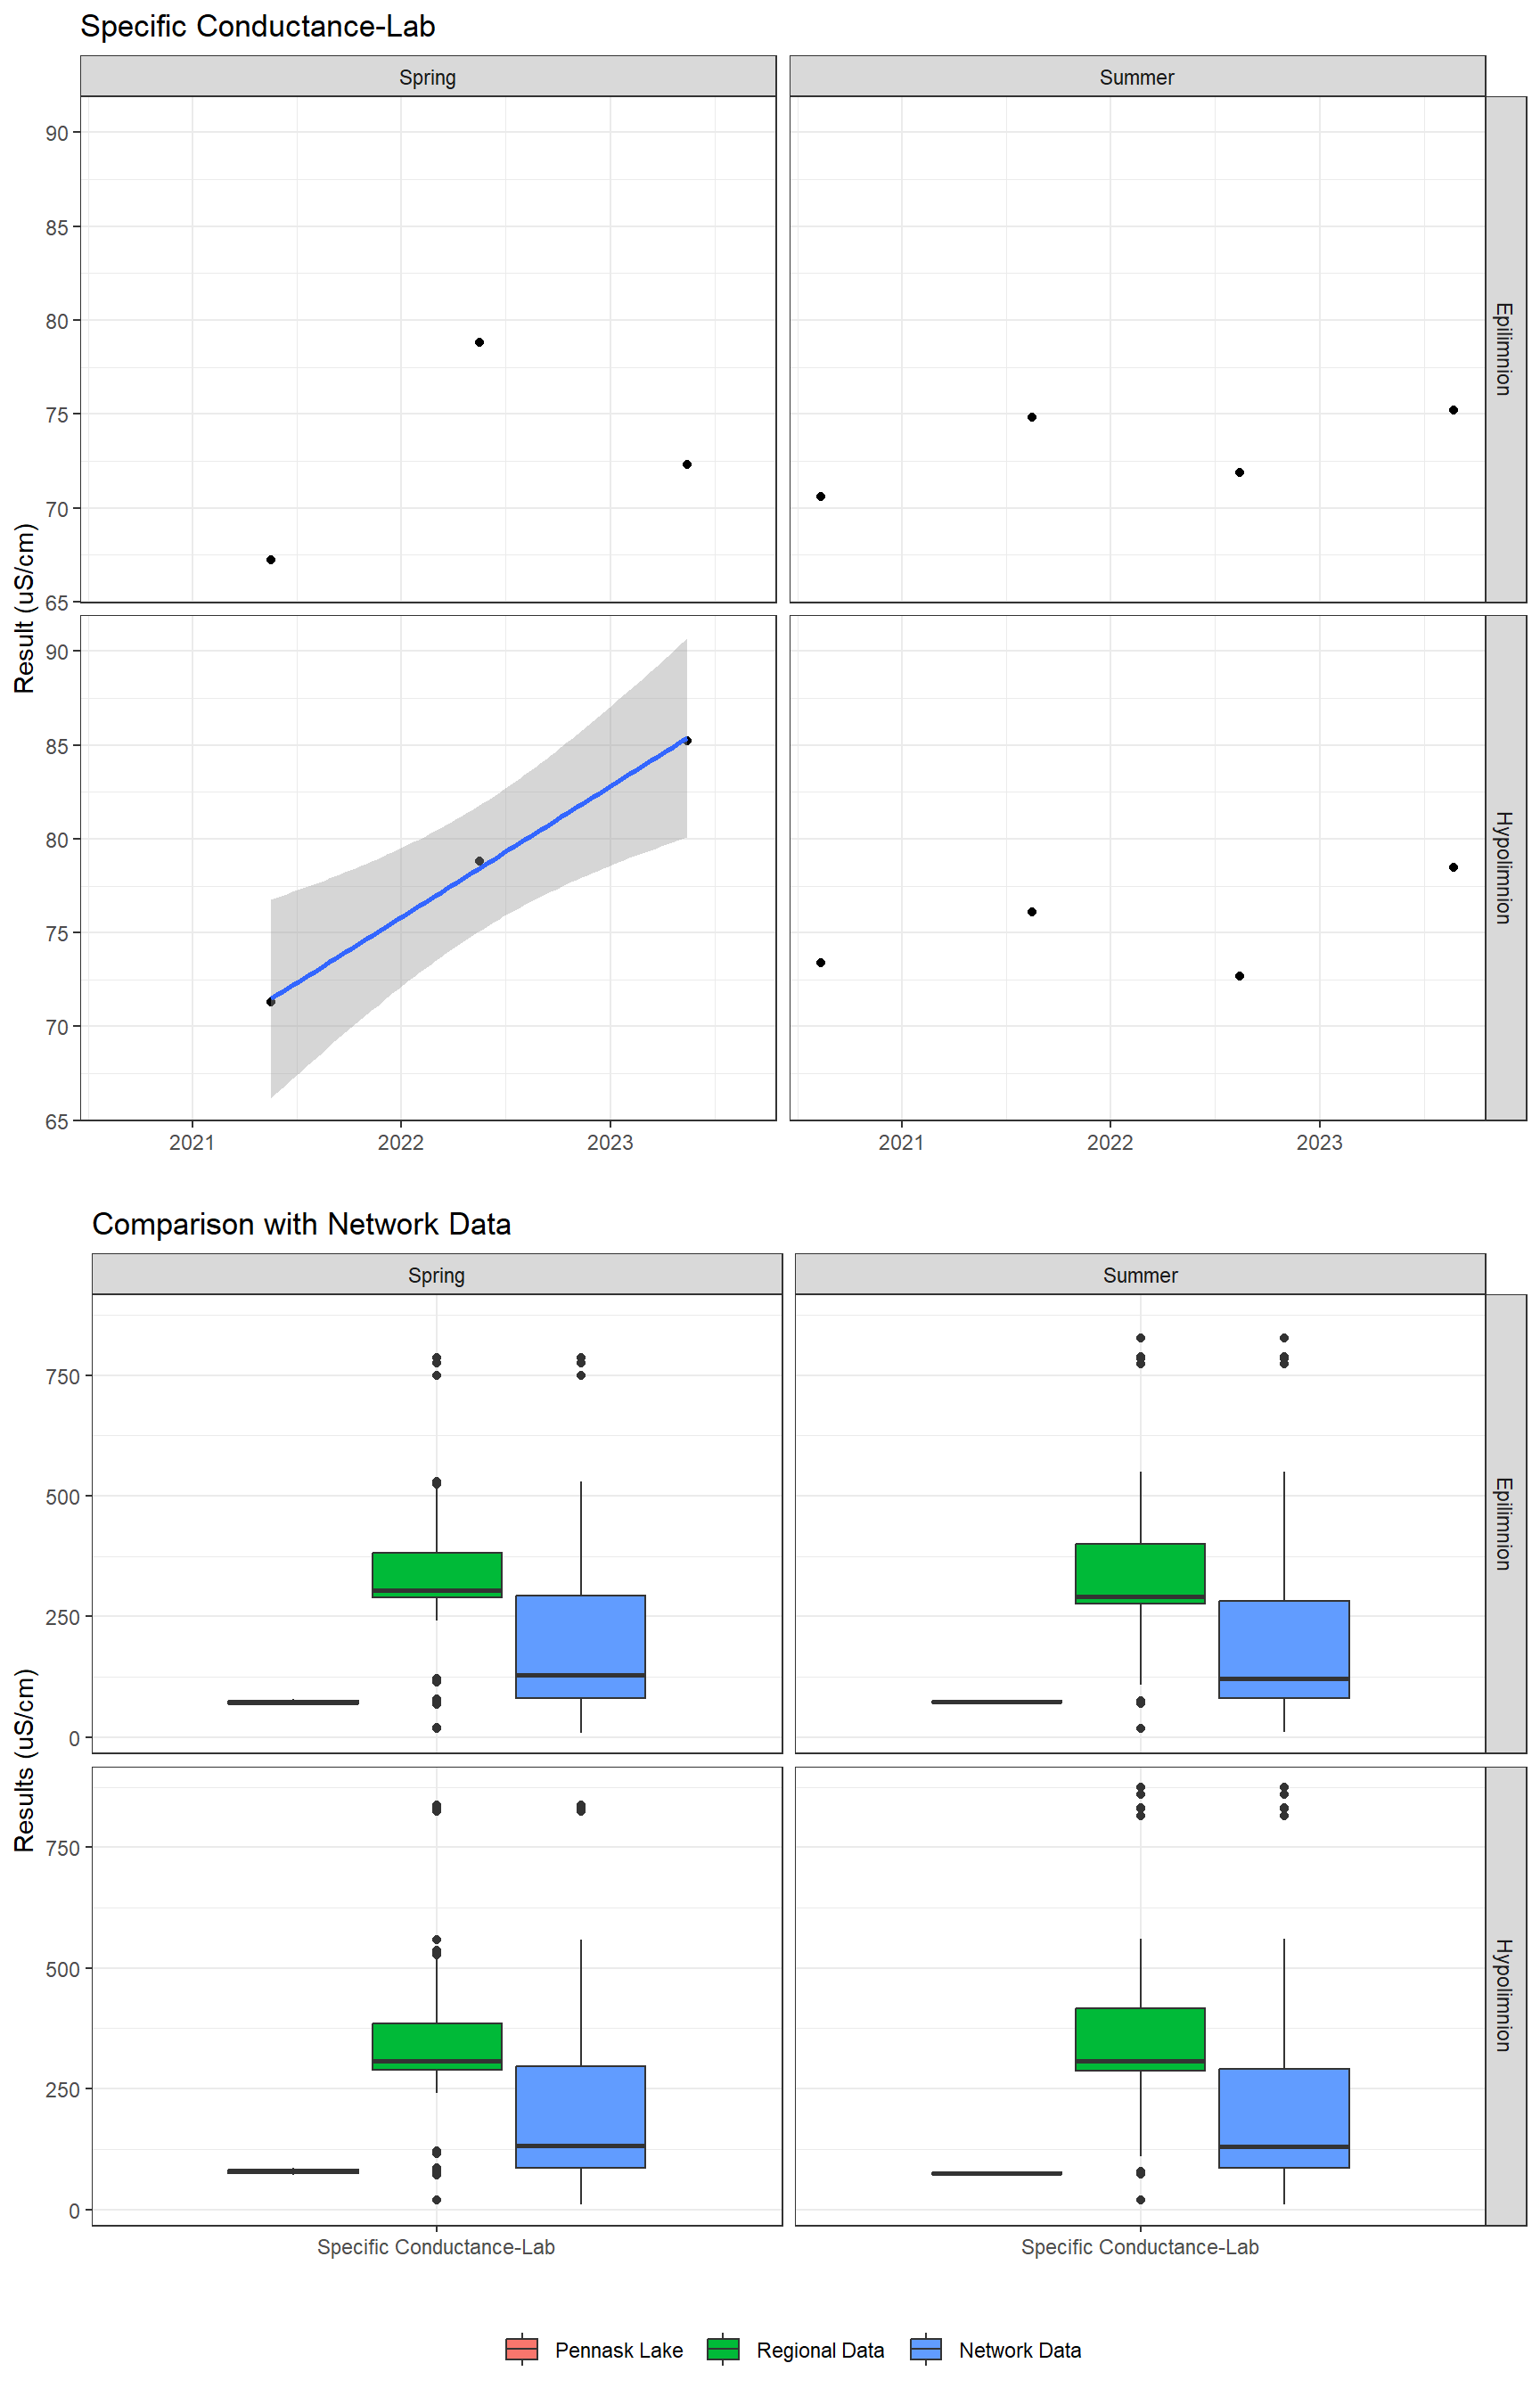 A plot showing results for Specific Conductance-Lab